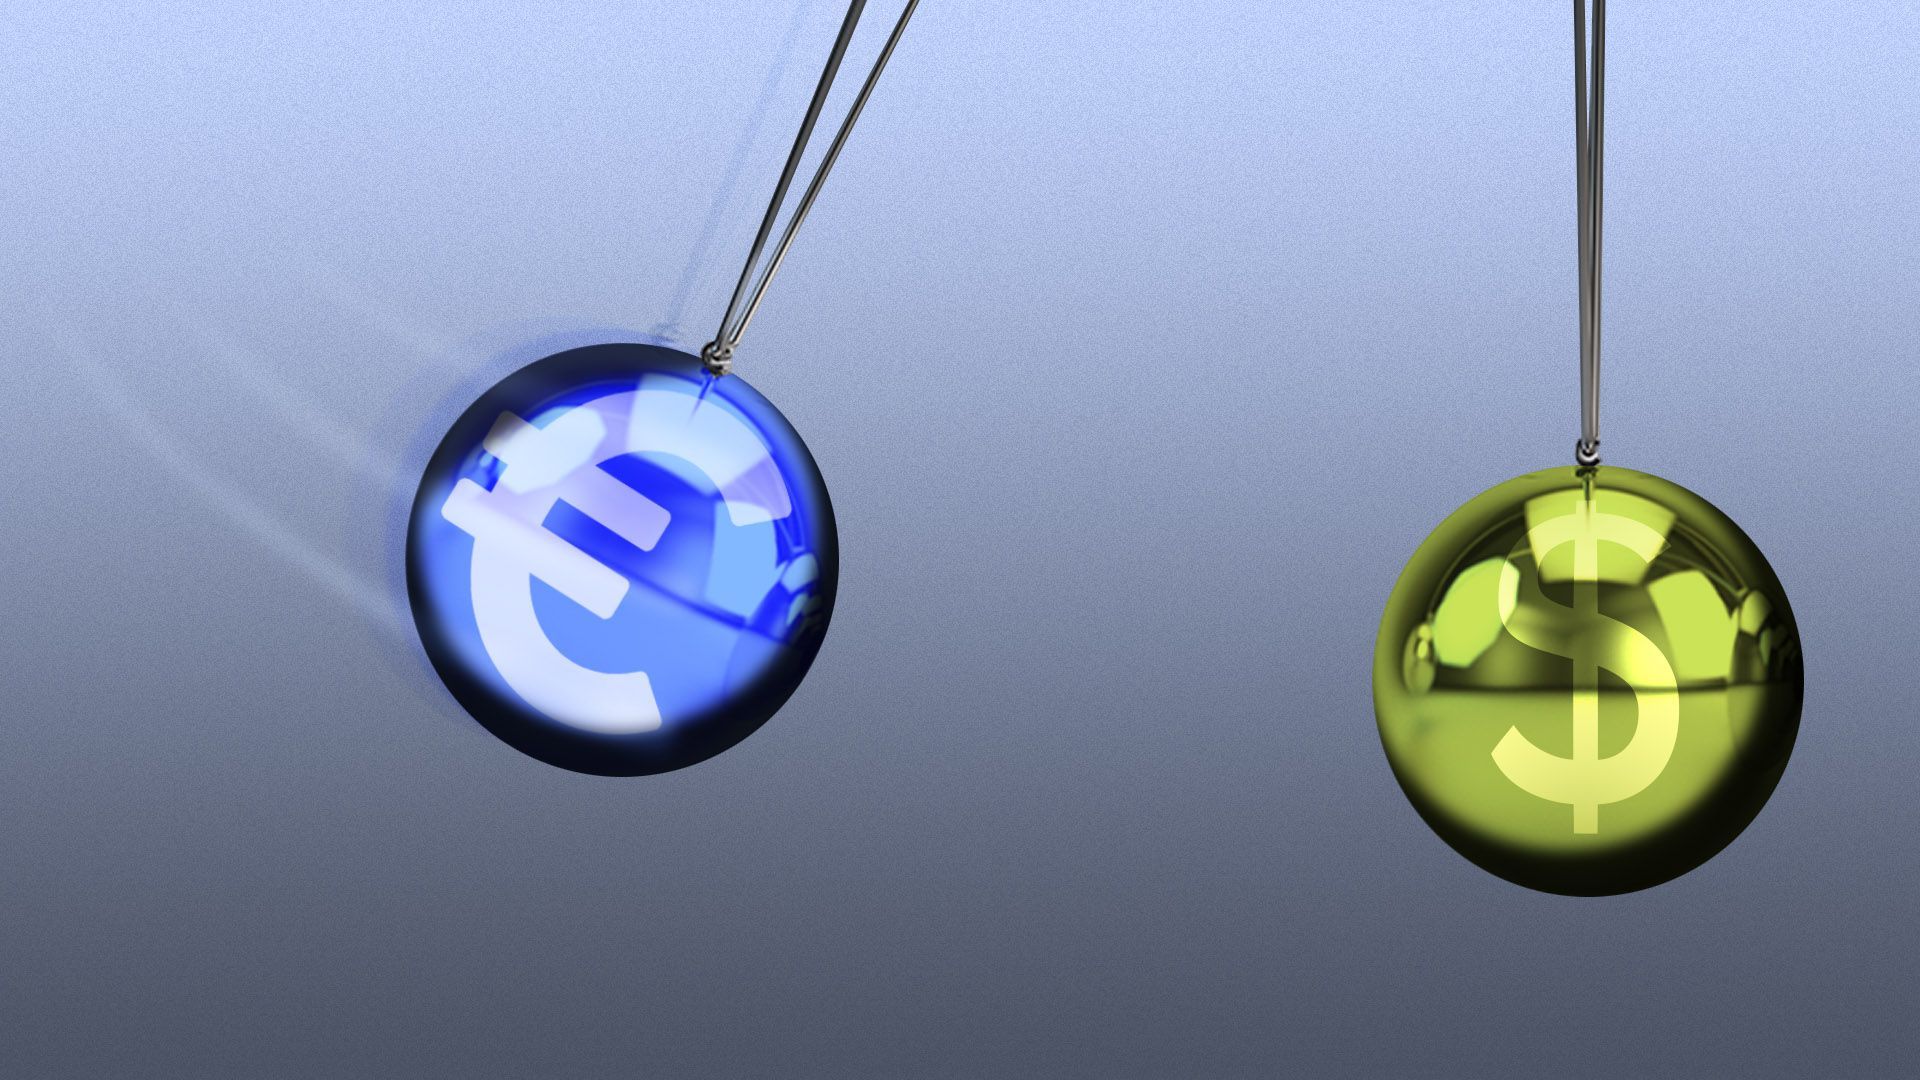 Illustration of two balls in a Newton's Cradle, one with a Euro symbol and the other with a dollar